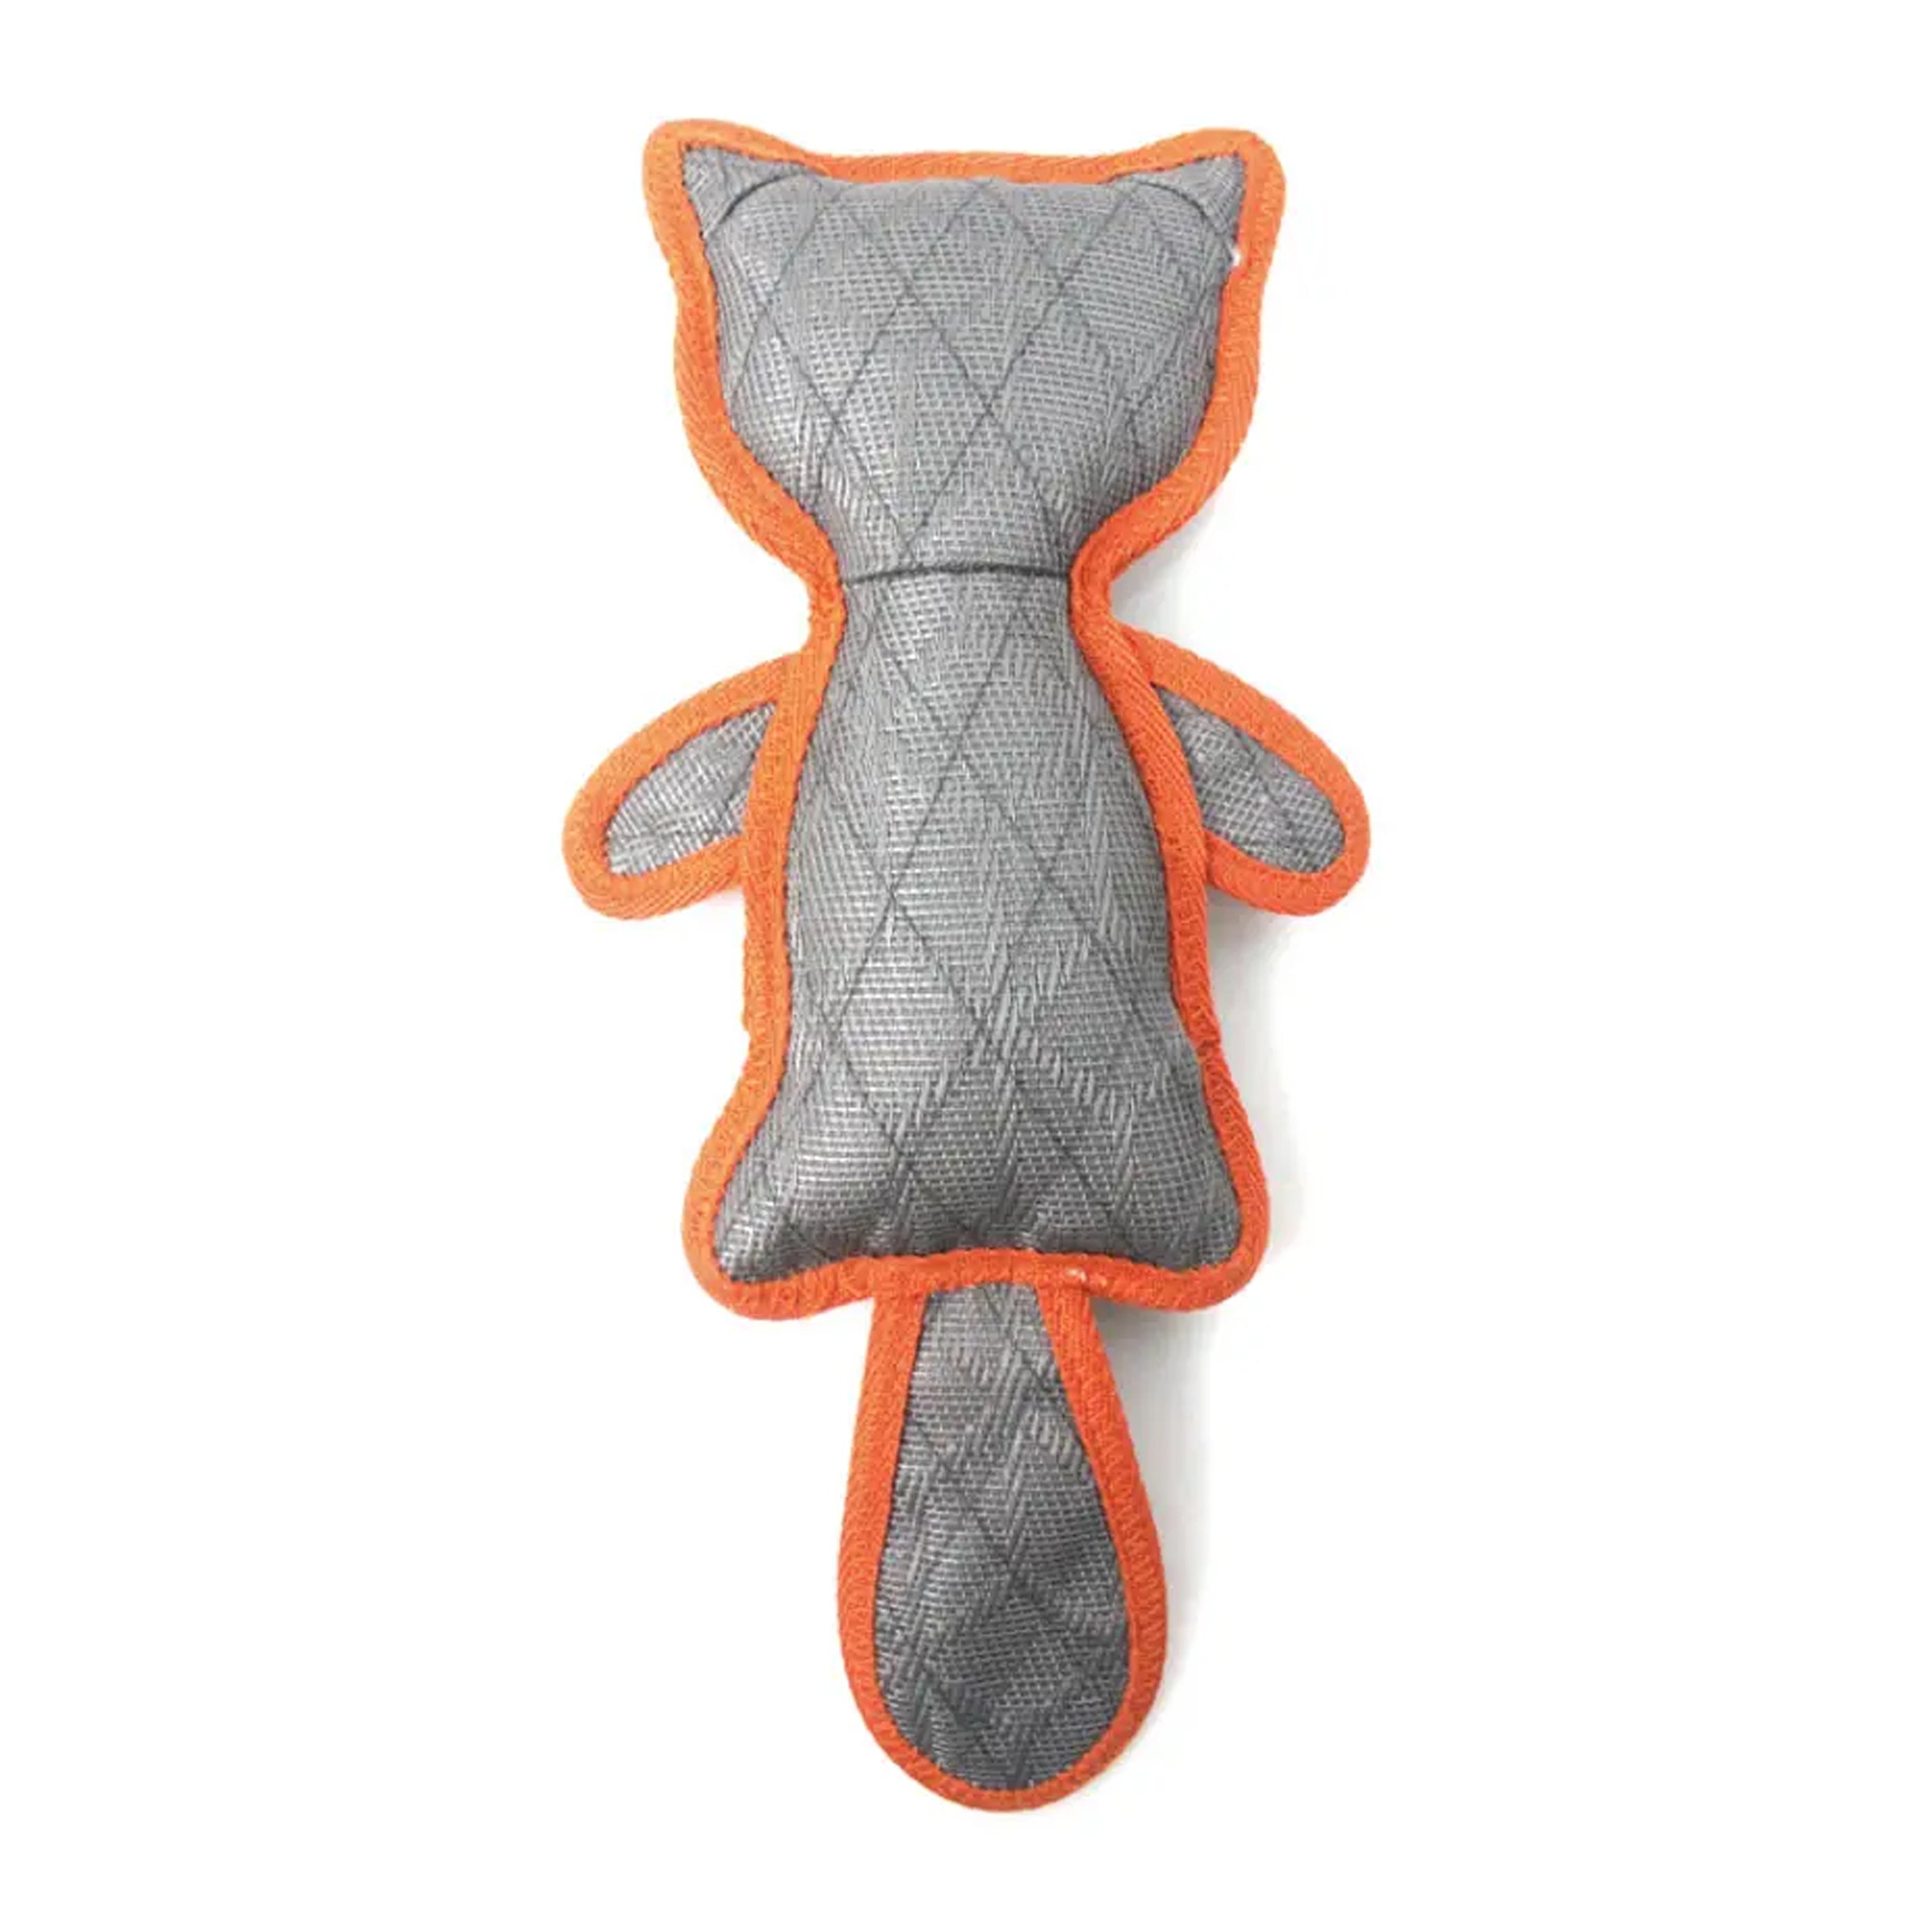 Fox Net Animal Shape Squeaky Pet Toy for Playful Entertainment